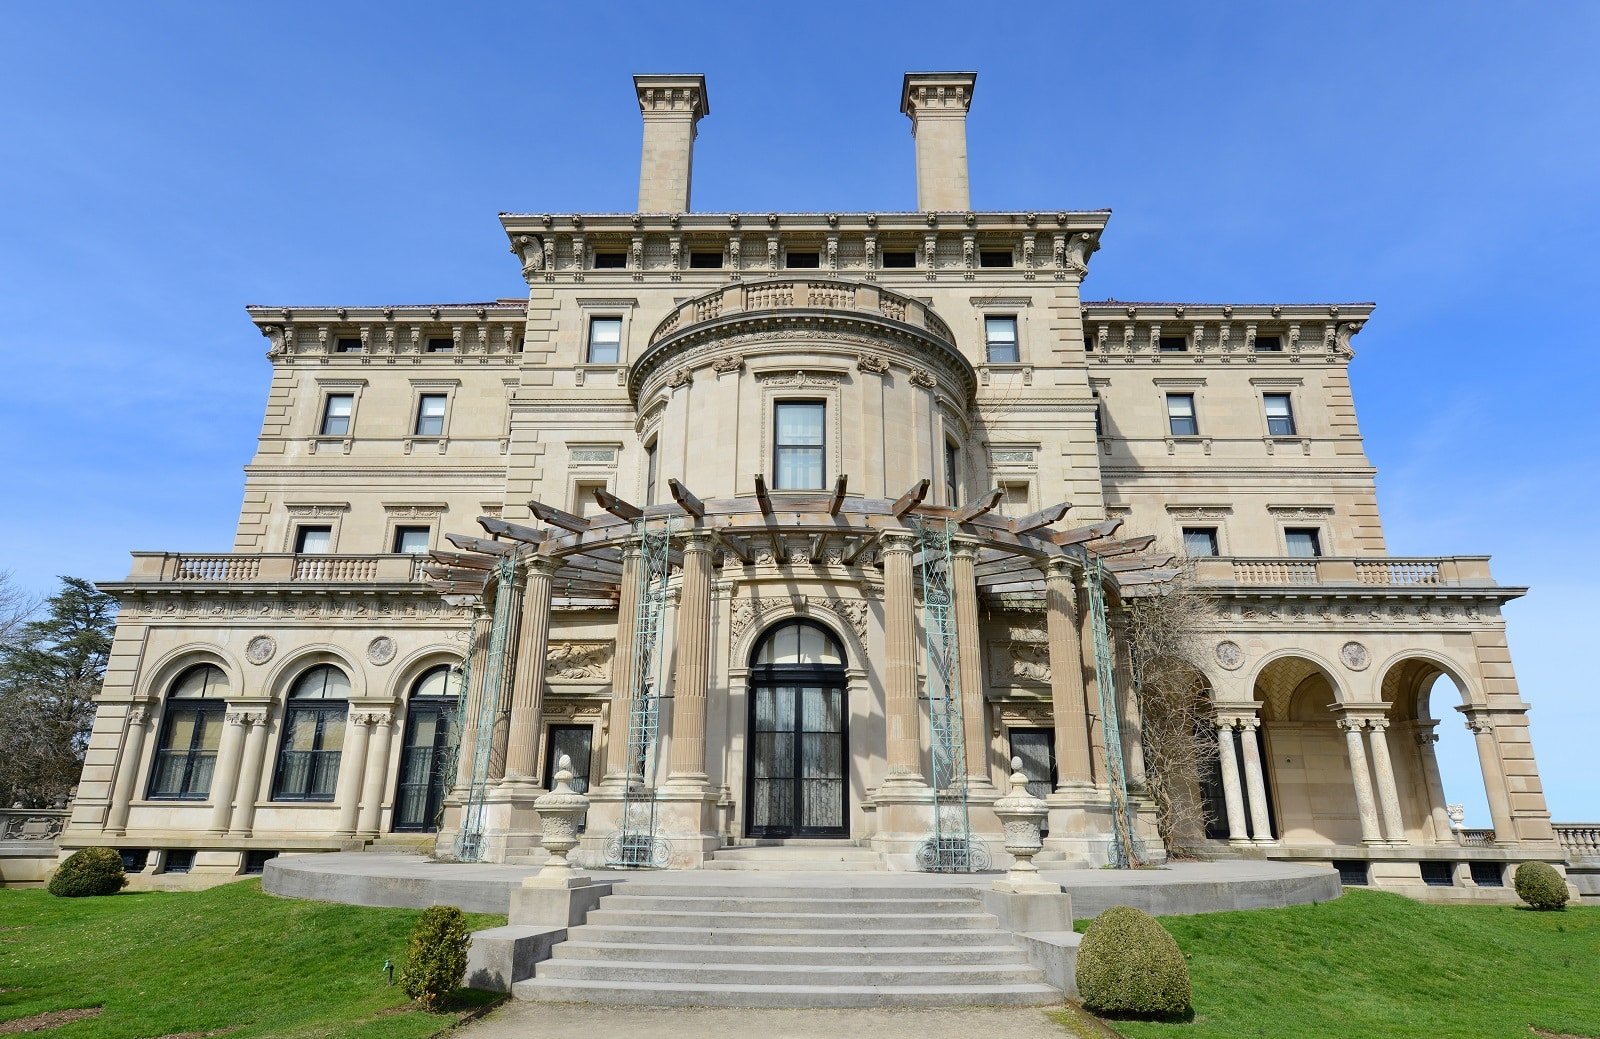 <p><span>The Breakers in Newport is a magnificent example of the Gilded Age’s wealth and extravagance. Built by the Vanderbilt family, this Italian Renaissance-style mansion features opulent interiors with rich furnishings, ornate ceilings, and a vast art collection. The mansion’s position overlooking the Atlantic Ocean offers stunning sea views. The summer months bring the estate to life with guided tours, but visiting during the Christmas season offers a unique experience as the mansion is adorned with festive decorations.</span></p> <p><b>Insider’s Tip: </b><span>Visit during Christmas for special decorations and festivities. </span></p> <p><b>When To Travel: </b><span>Summer for guided tours and beautiful weather. </span></p> <p><b>How To Get There: </b><span>Newport is a short drive from Providence or Boston.</span></p>